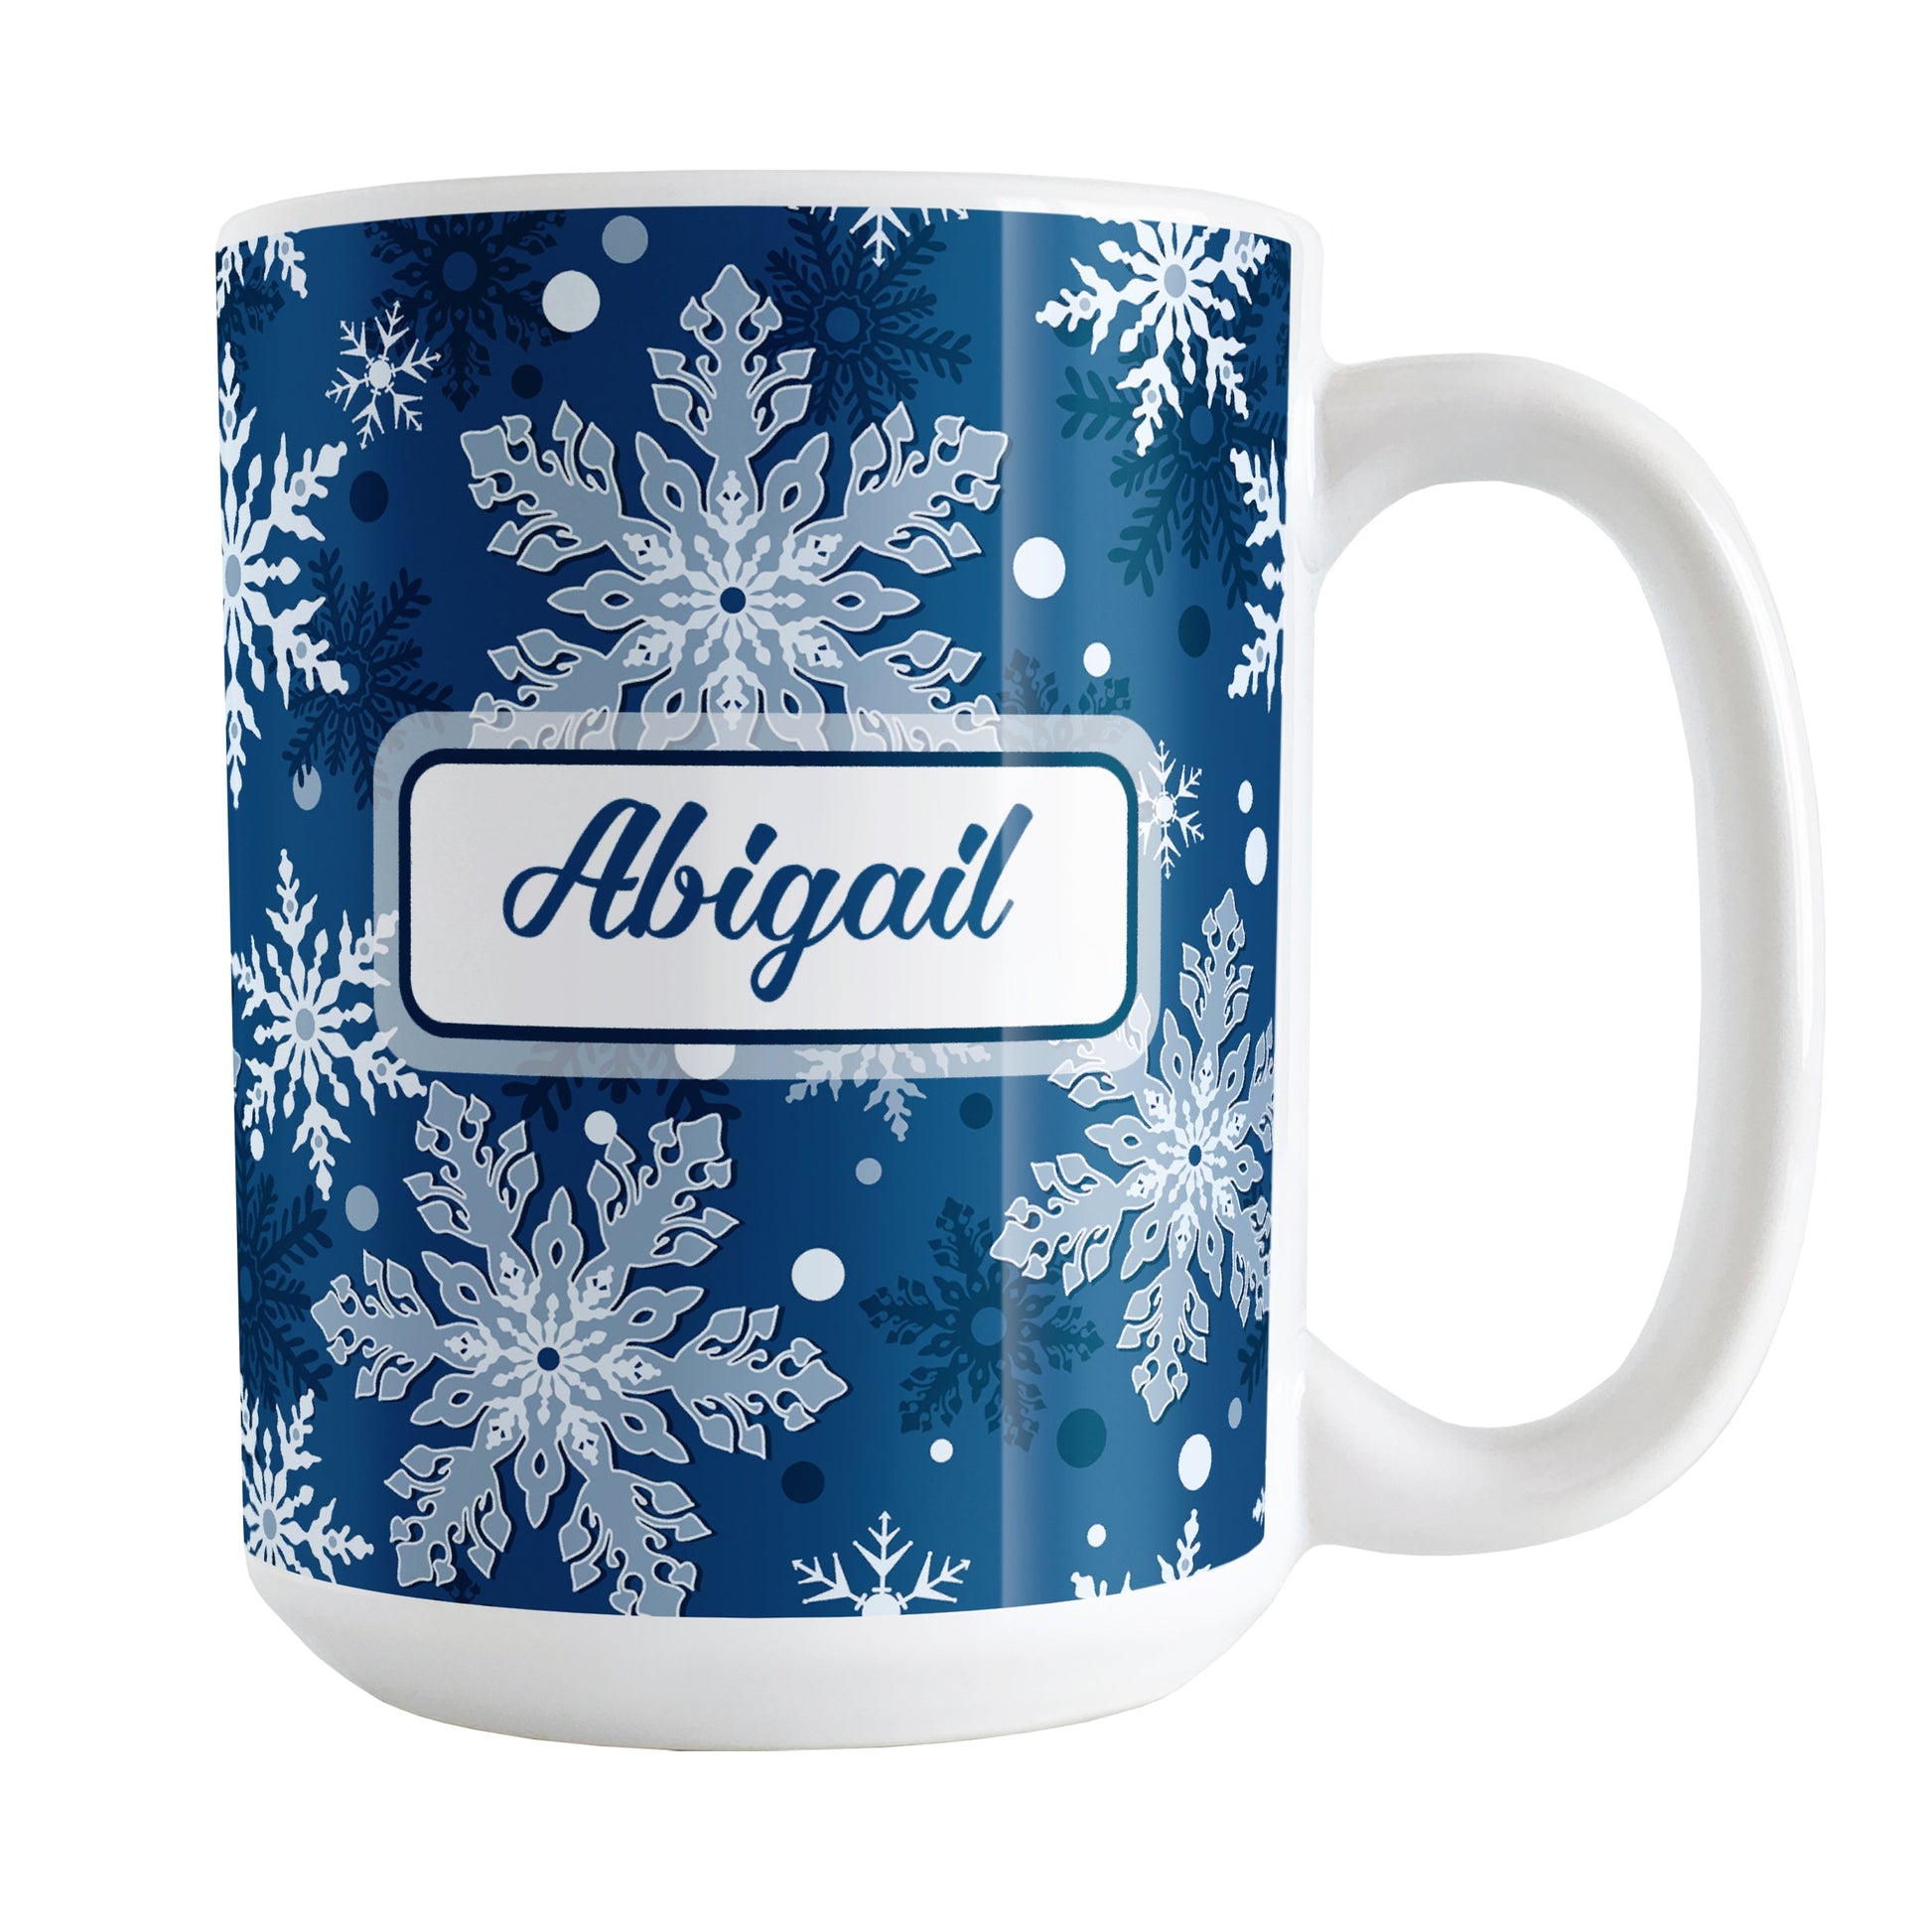 Personalized Classic Blue Snowflake Winter Mug (15oz) at Amy's Coffee Mugs. A ceramic coffee mug designed with a pattern of different shades of blue snowflakes over a classic blue background color that wraps around the mug to the handle. Your name is custom printed in a blue script font on both sides of the mug. 